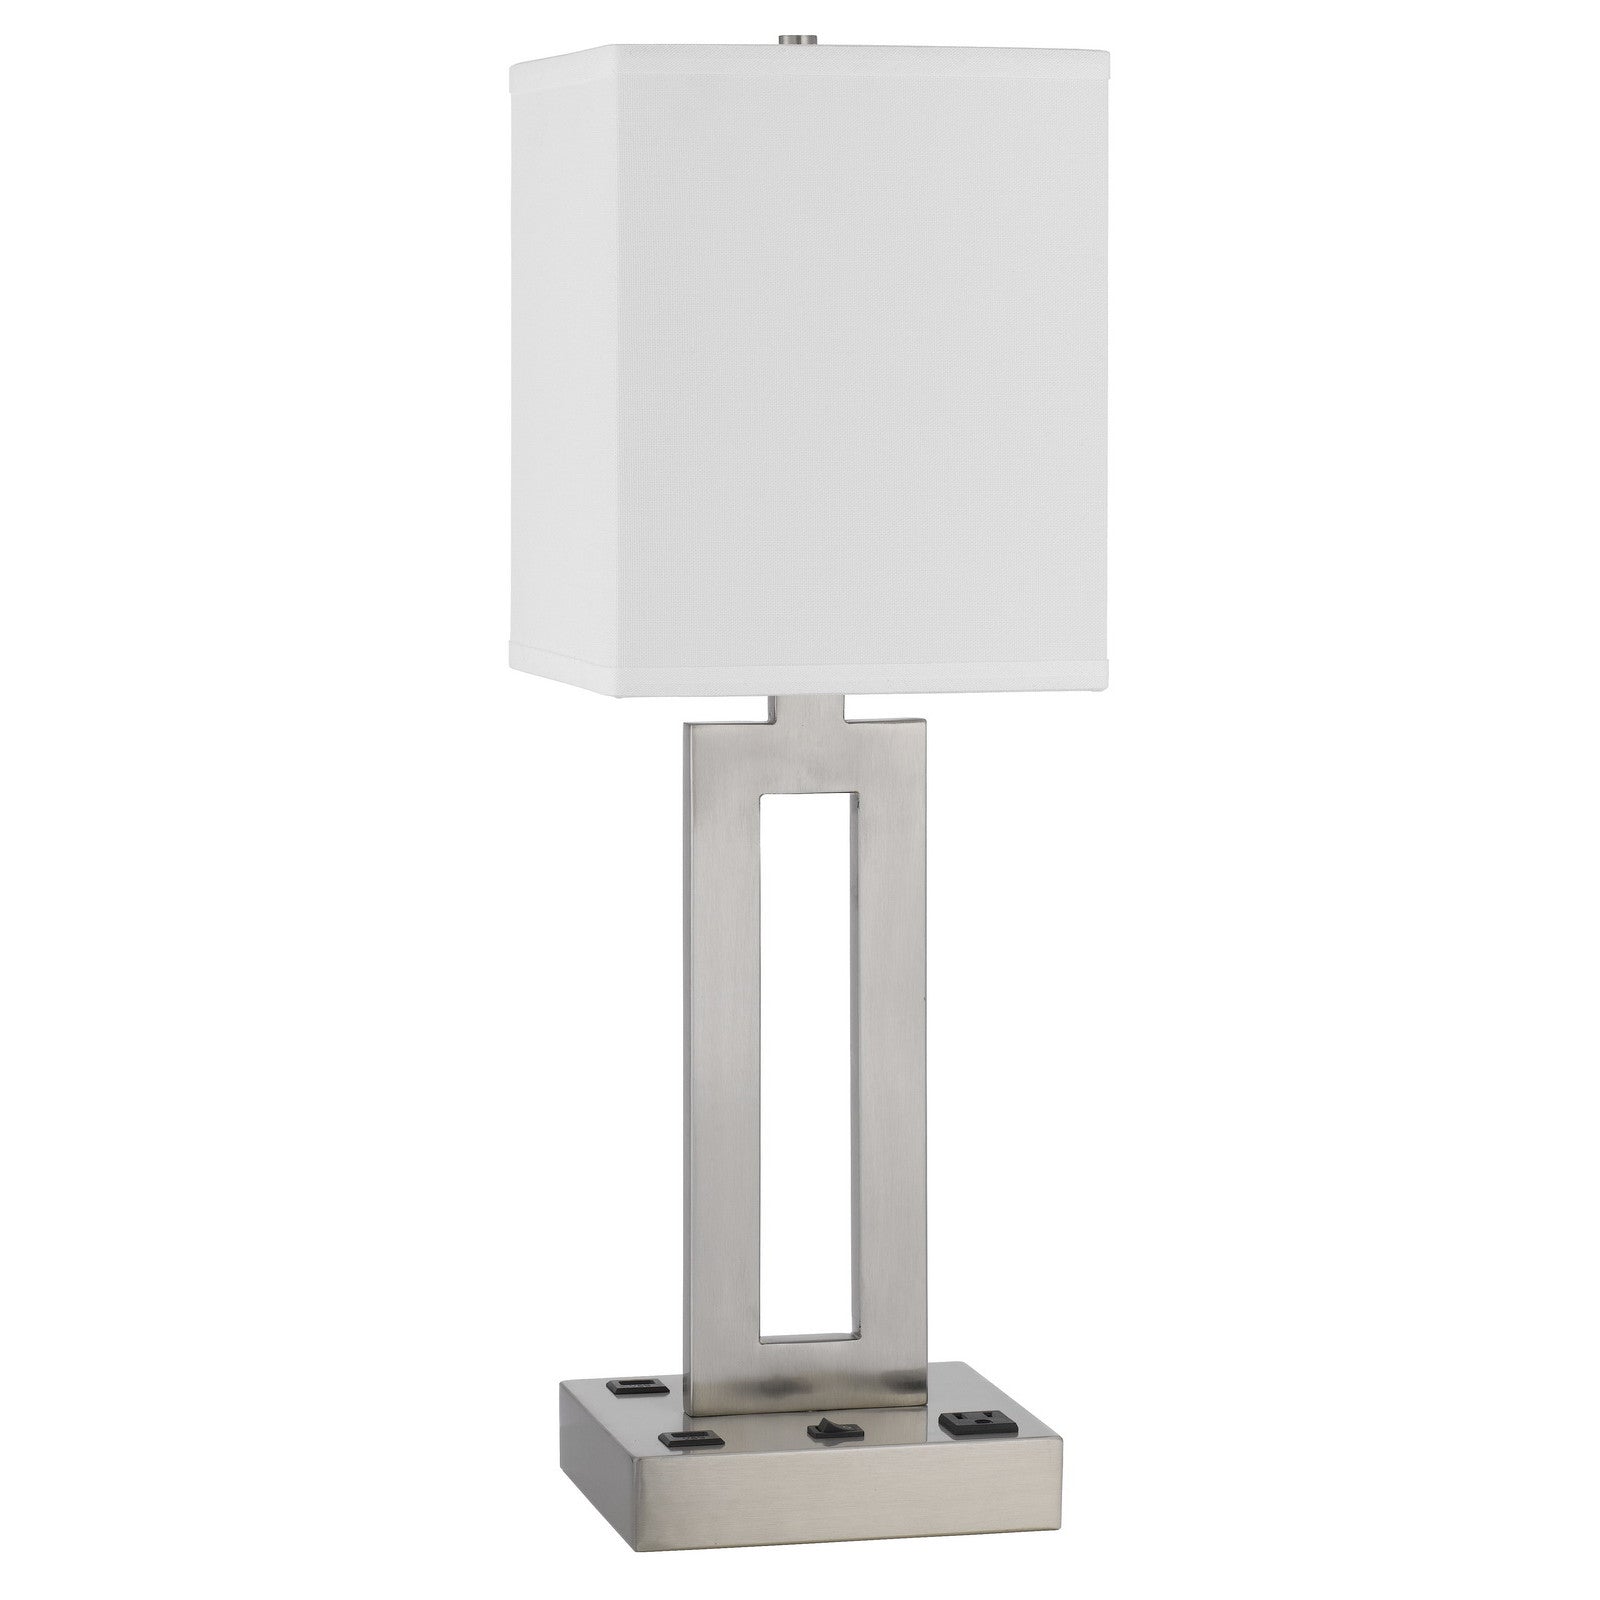 24" Nickel Metal Desk Usb Table Lamp With White Drum Shade